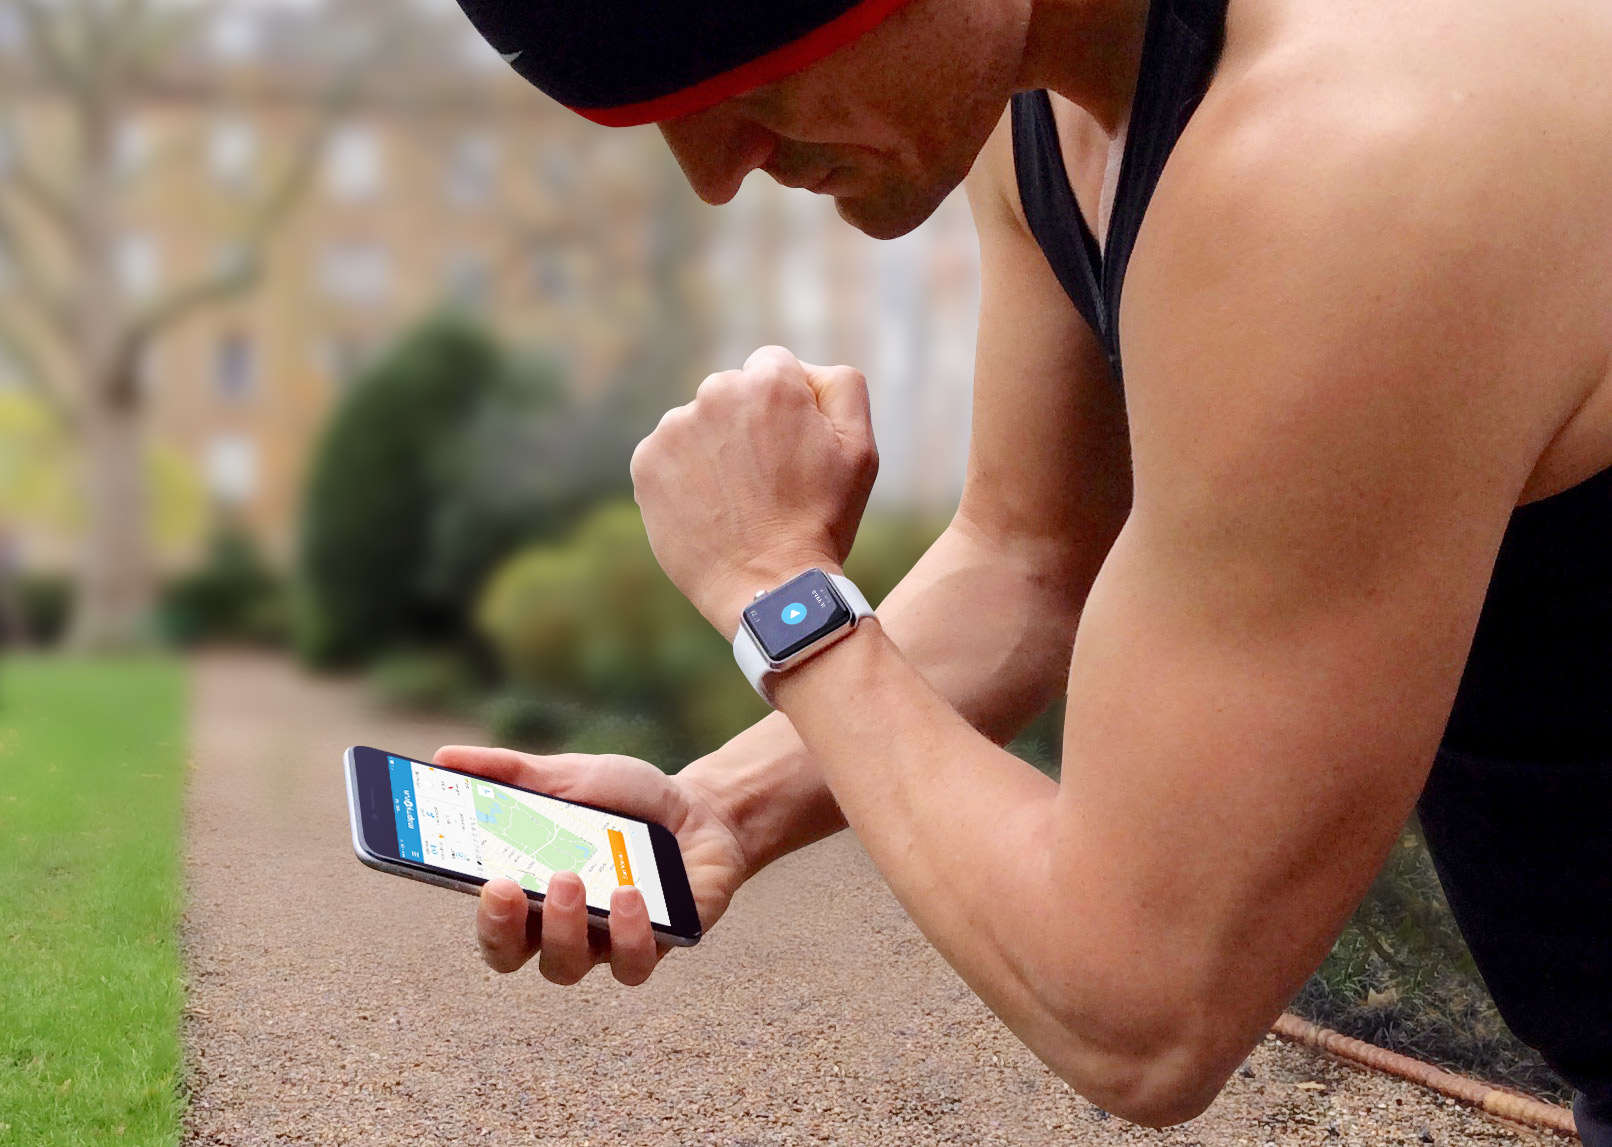 And the winner is… find out which running app offers the most features